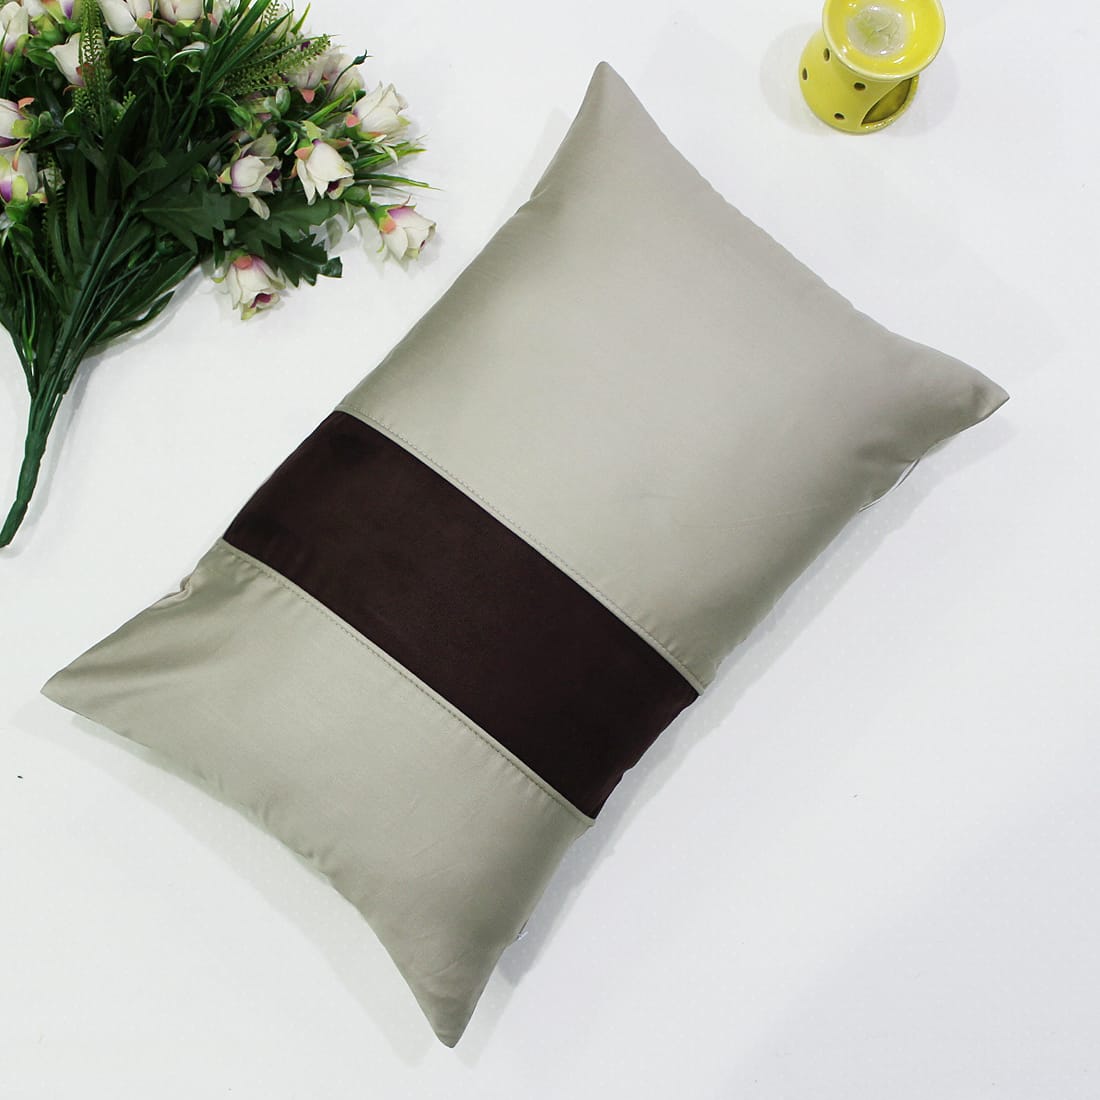 Cotton Satin Suede Patch Throw/Lumbar Pillow for Couch/Bed (with insert)